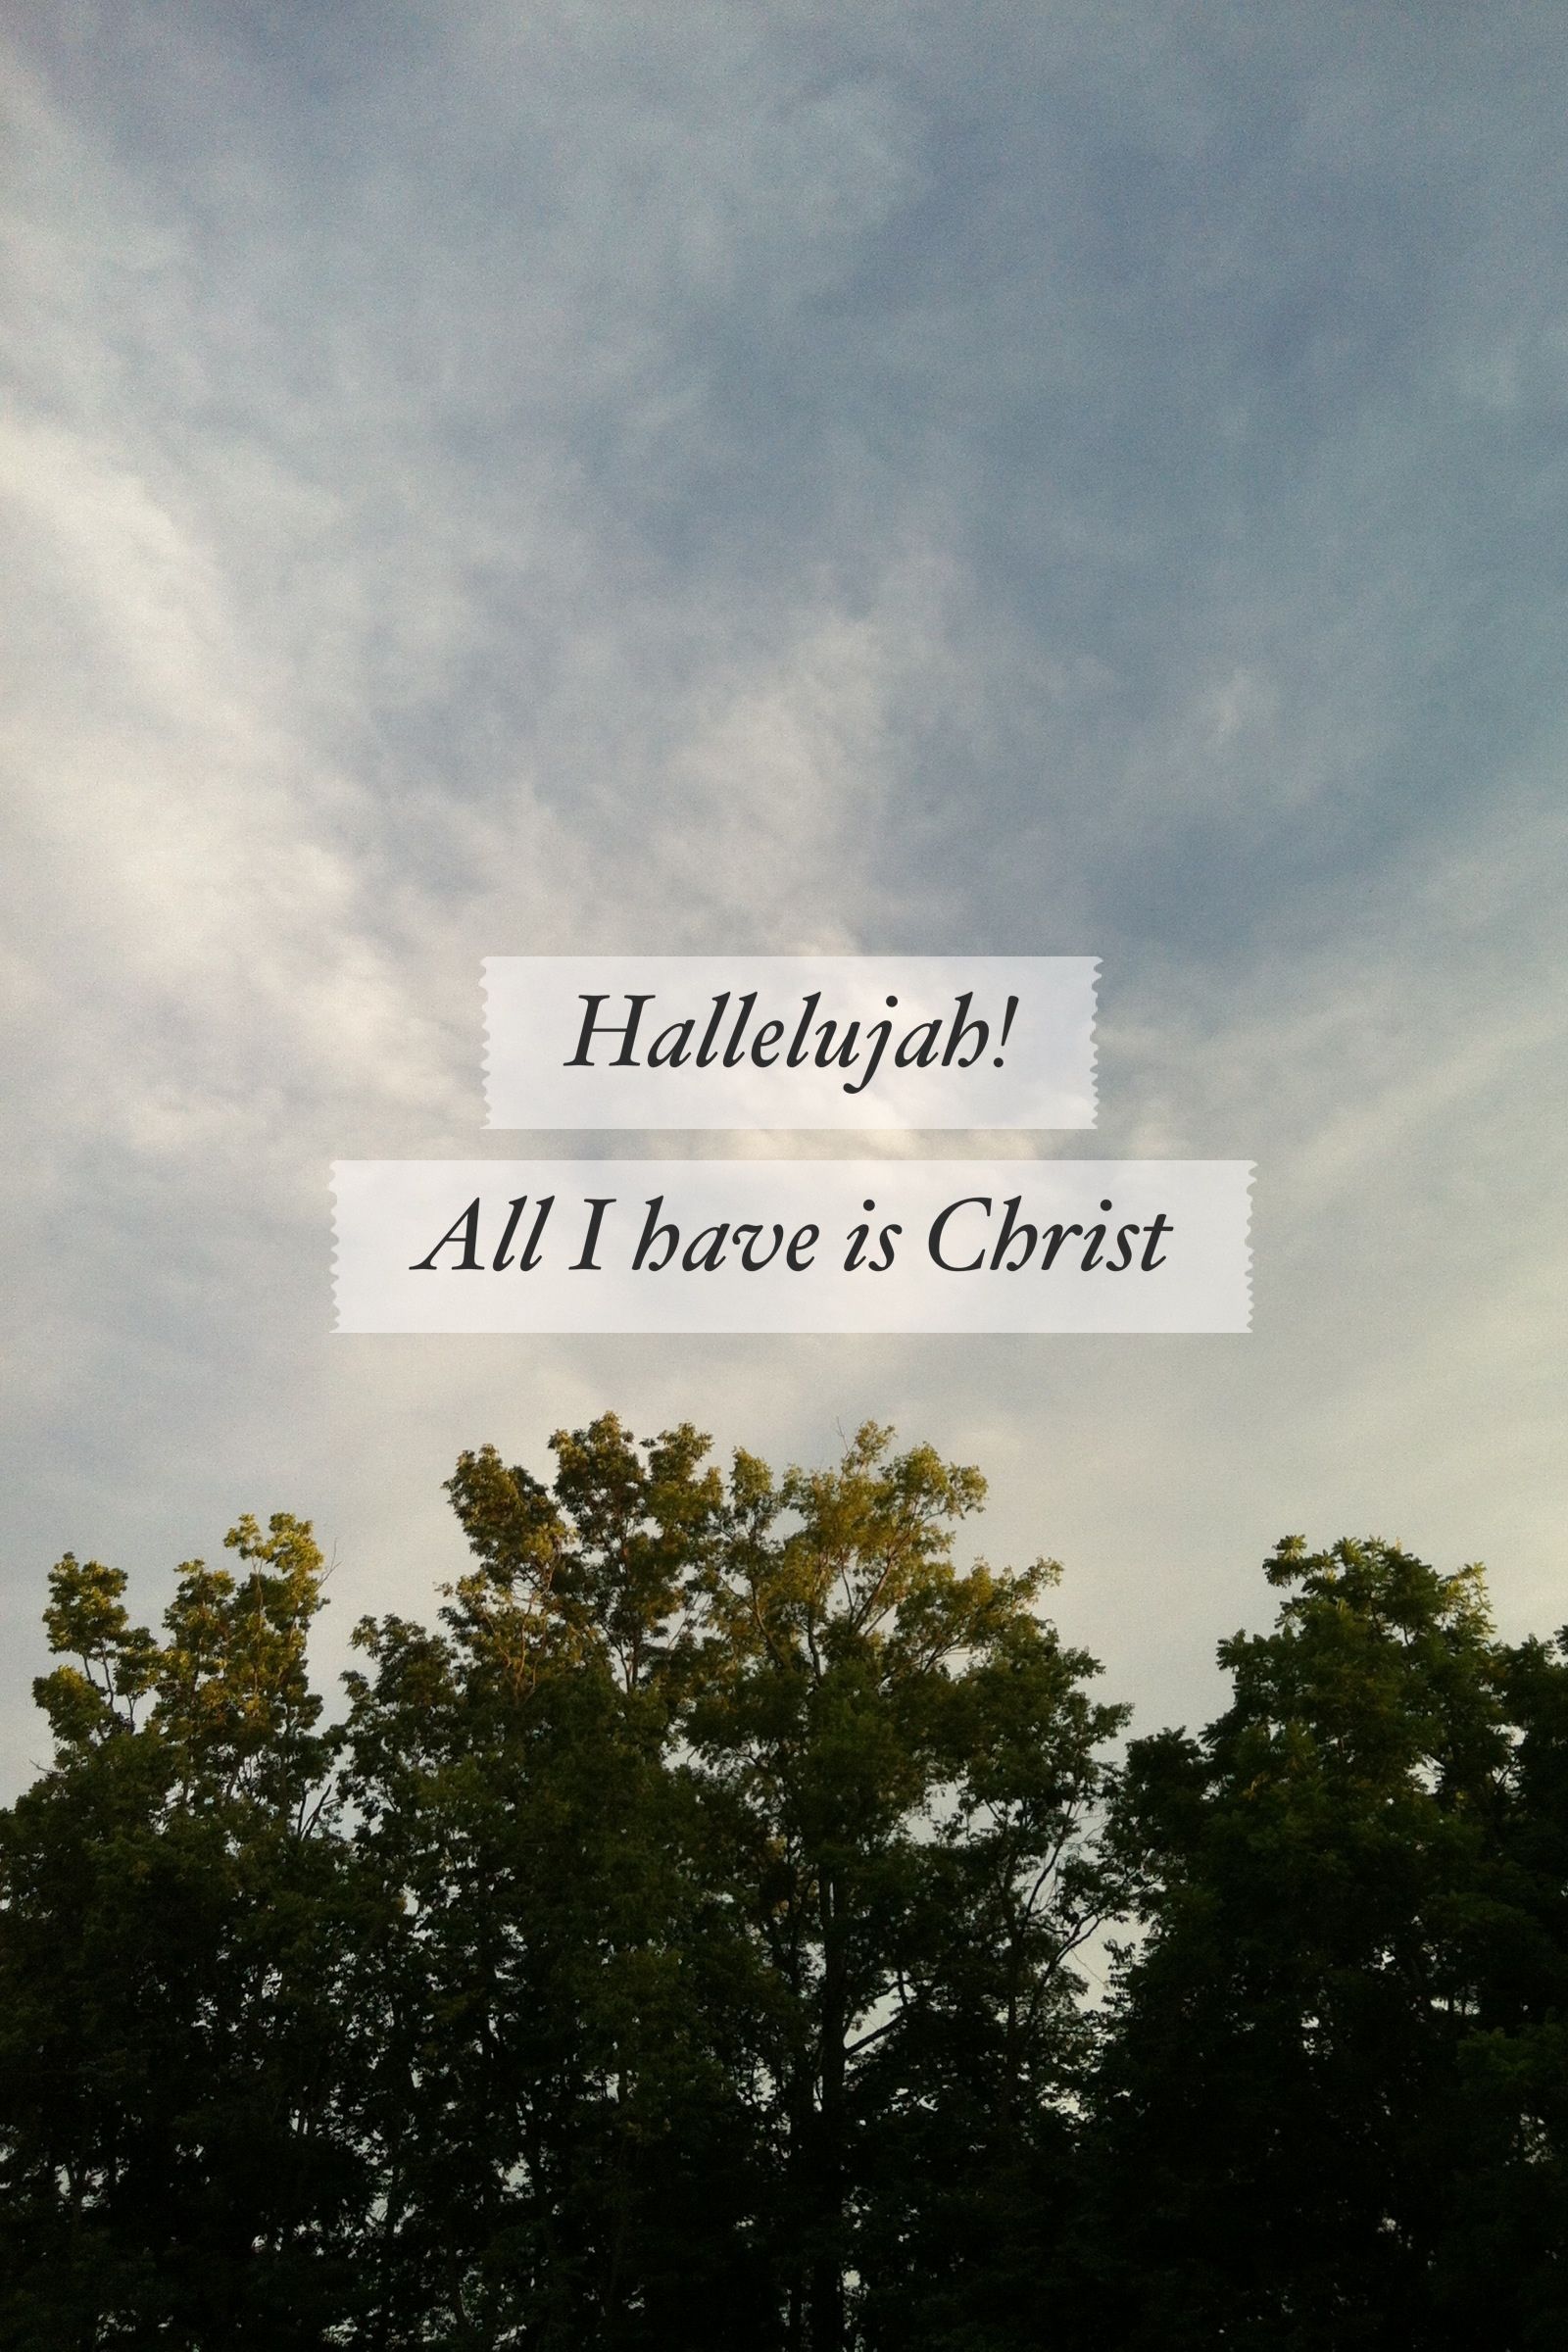 Hallelujah! All I have is Christ. fix your eyes on Jesus